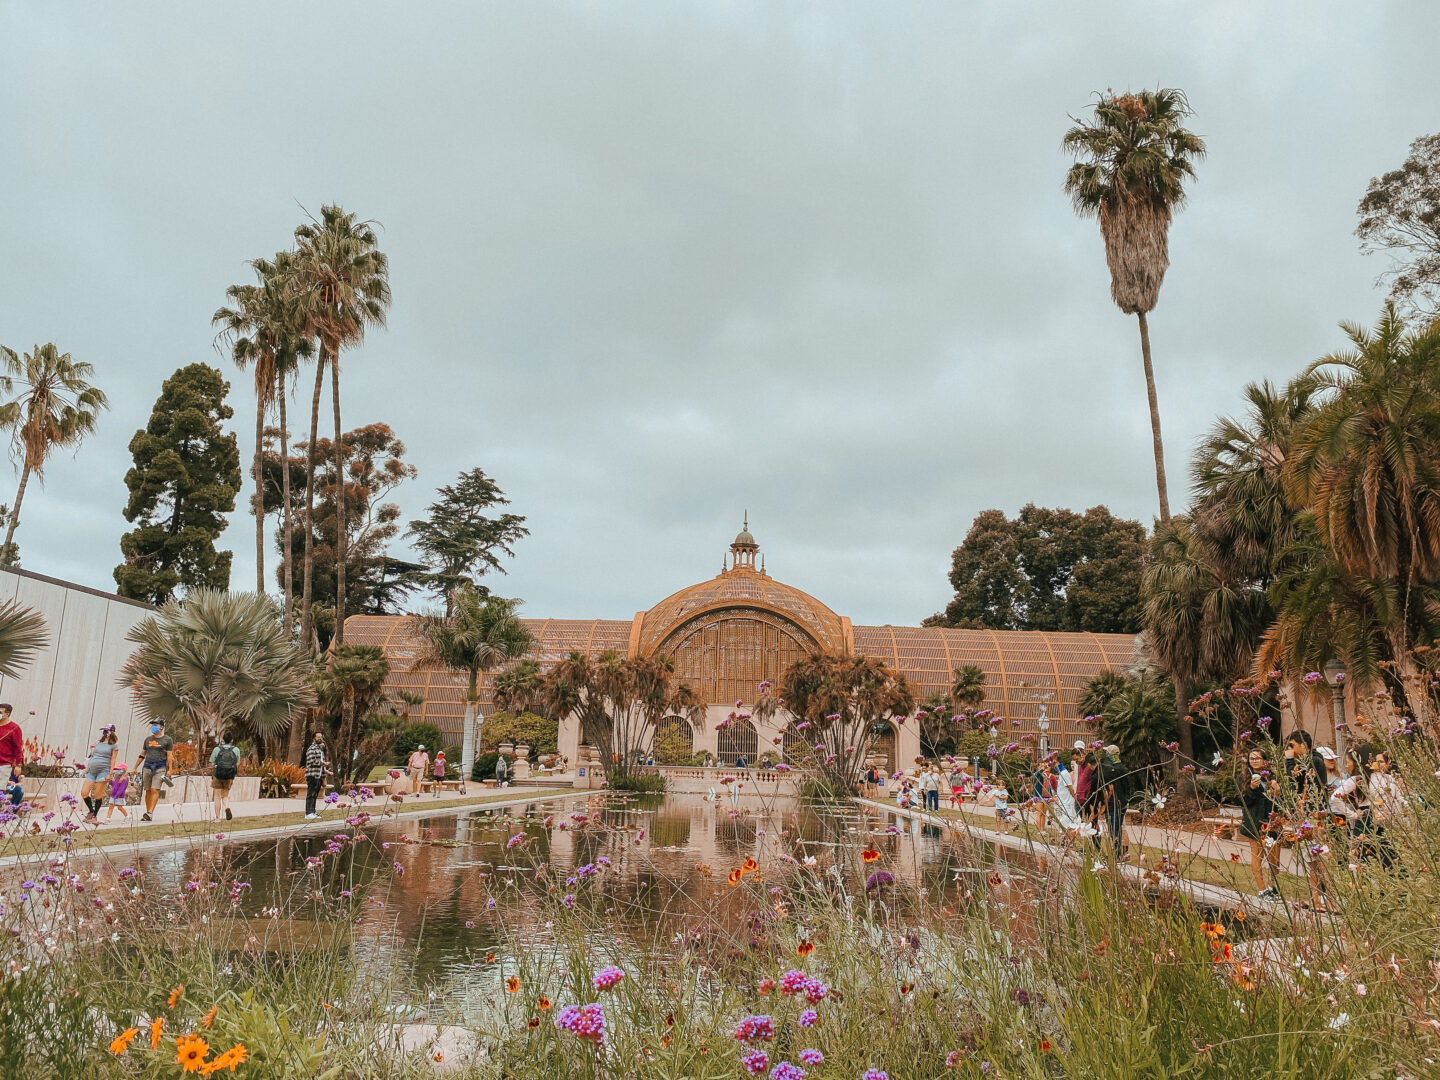 How to spend one day in San Diego itinerary - Palm Trees and Pellegrino San Diego and California travel tips - Balboa Park Botanical Garden Building